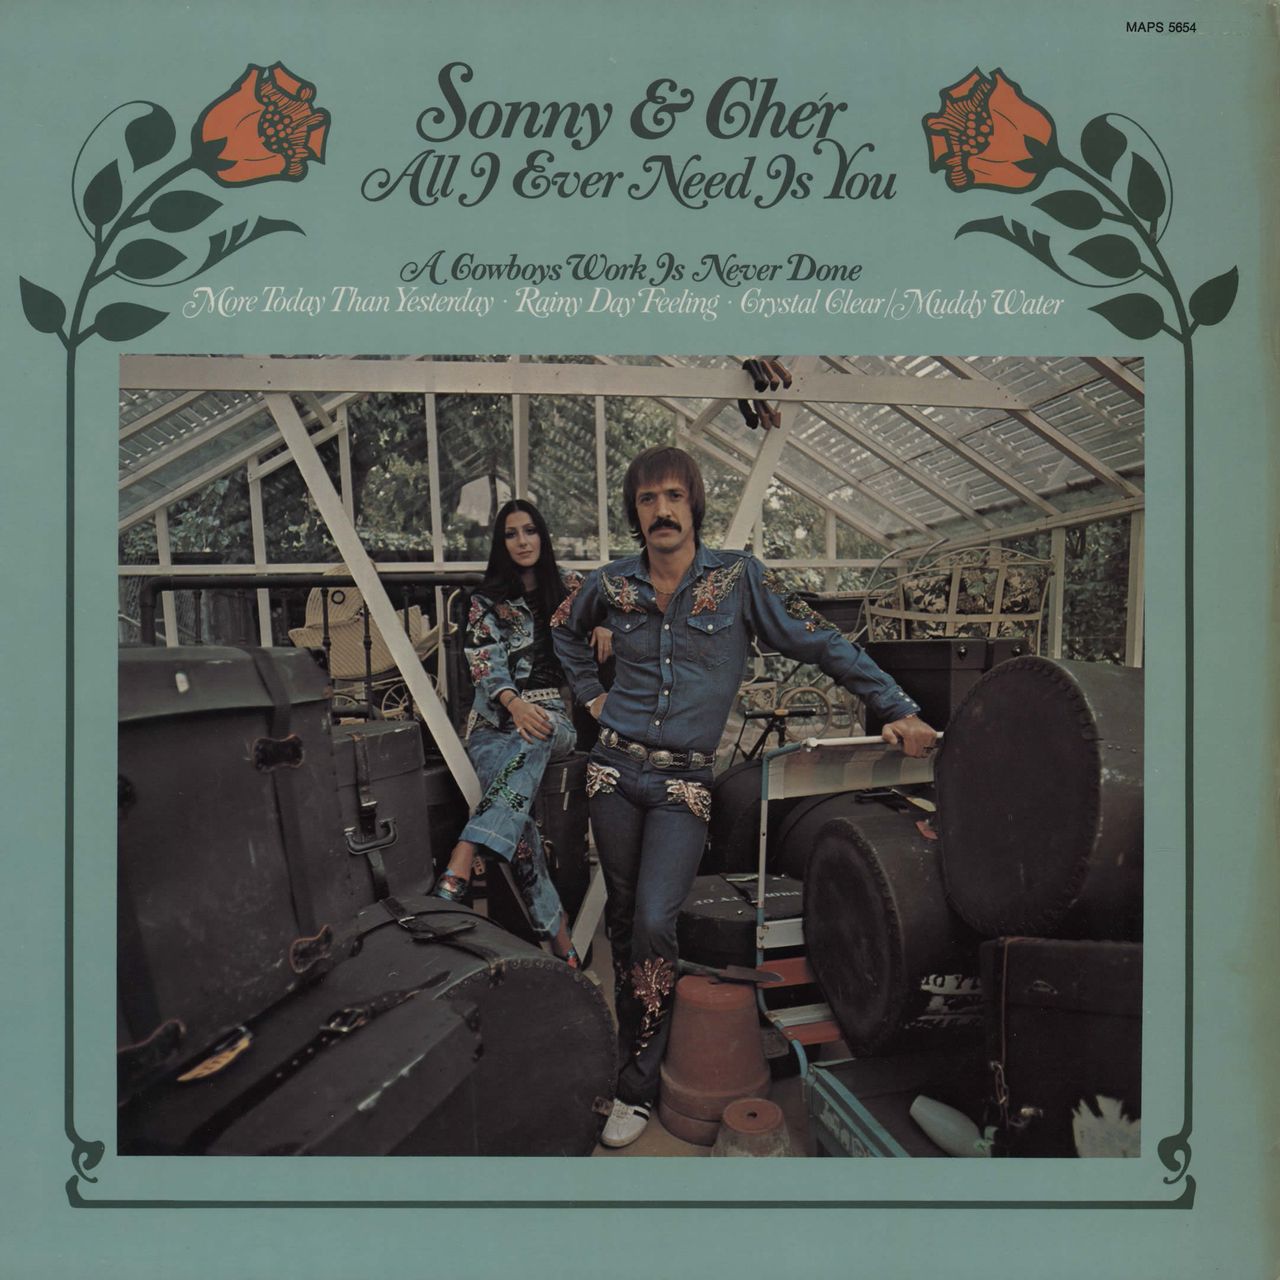 Sonny & Cher All I Ever Need Is You German vinyl LP album (LP record) MAPS5654